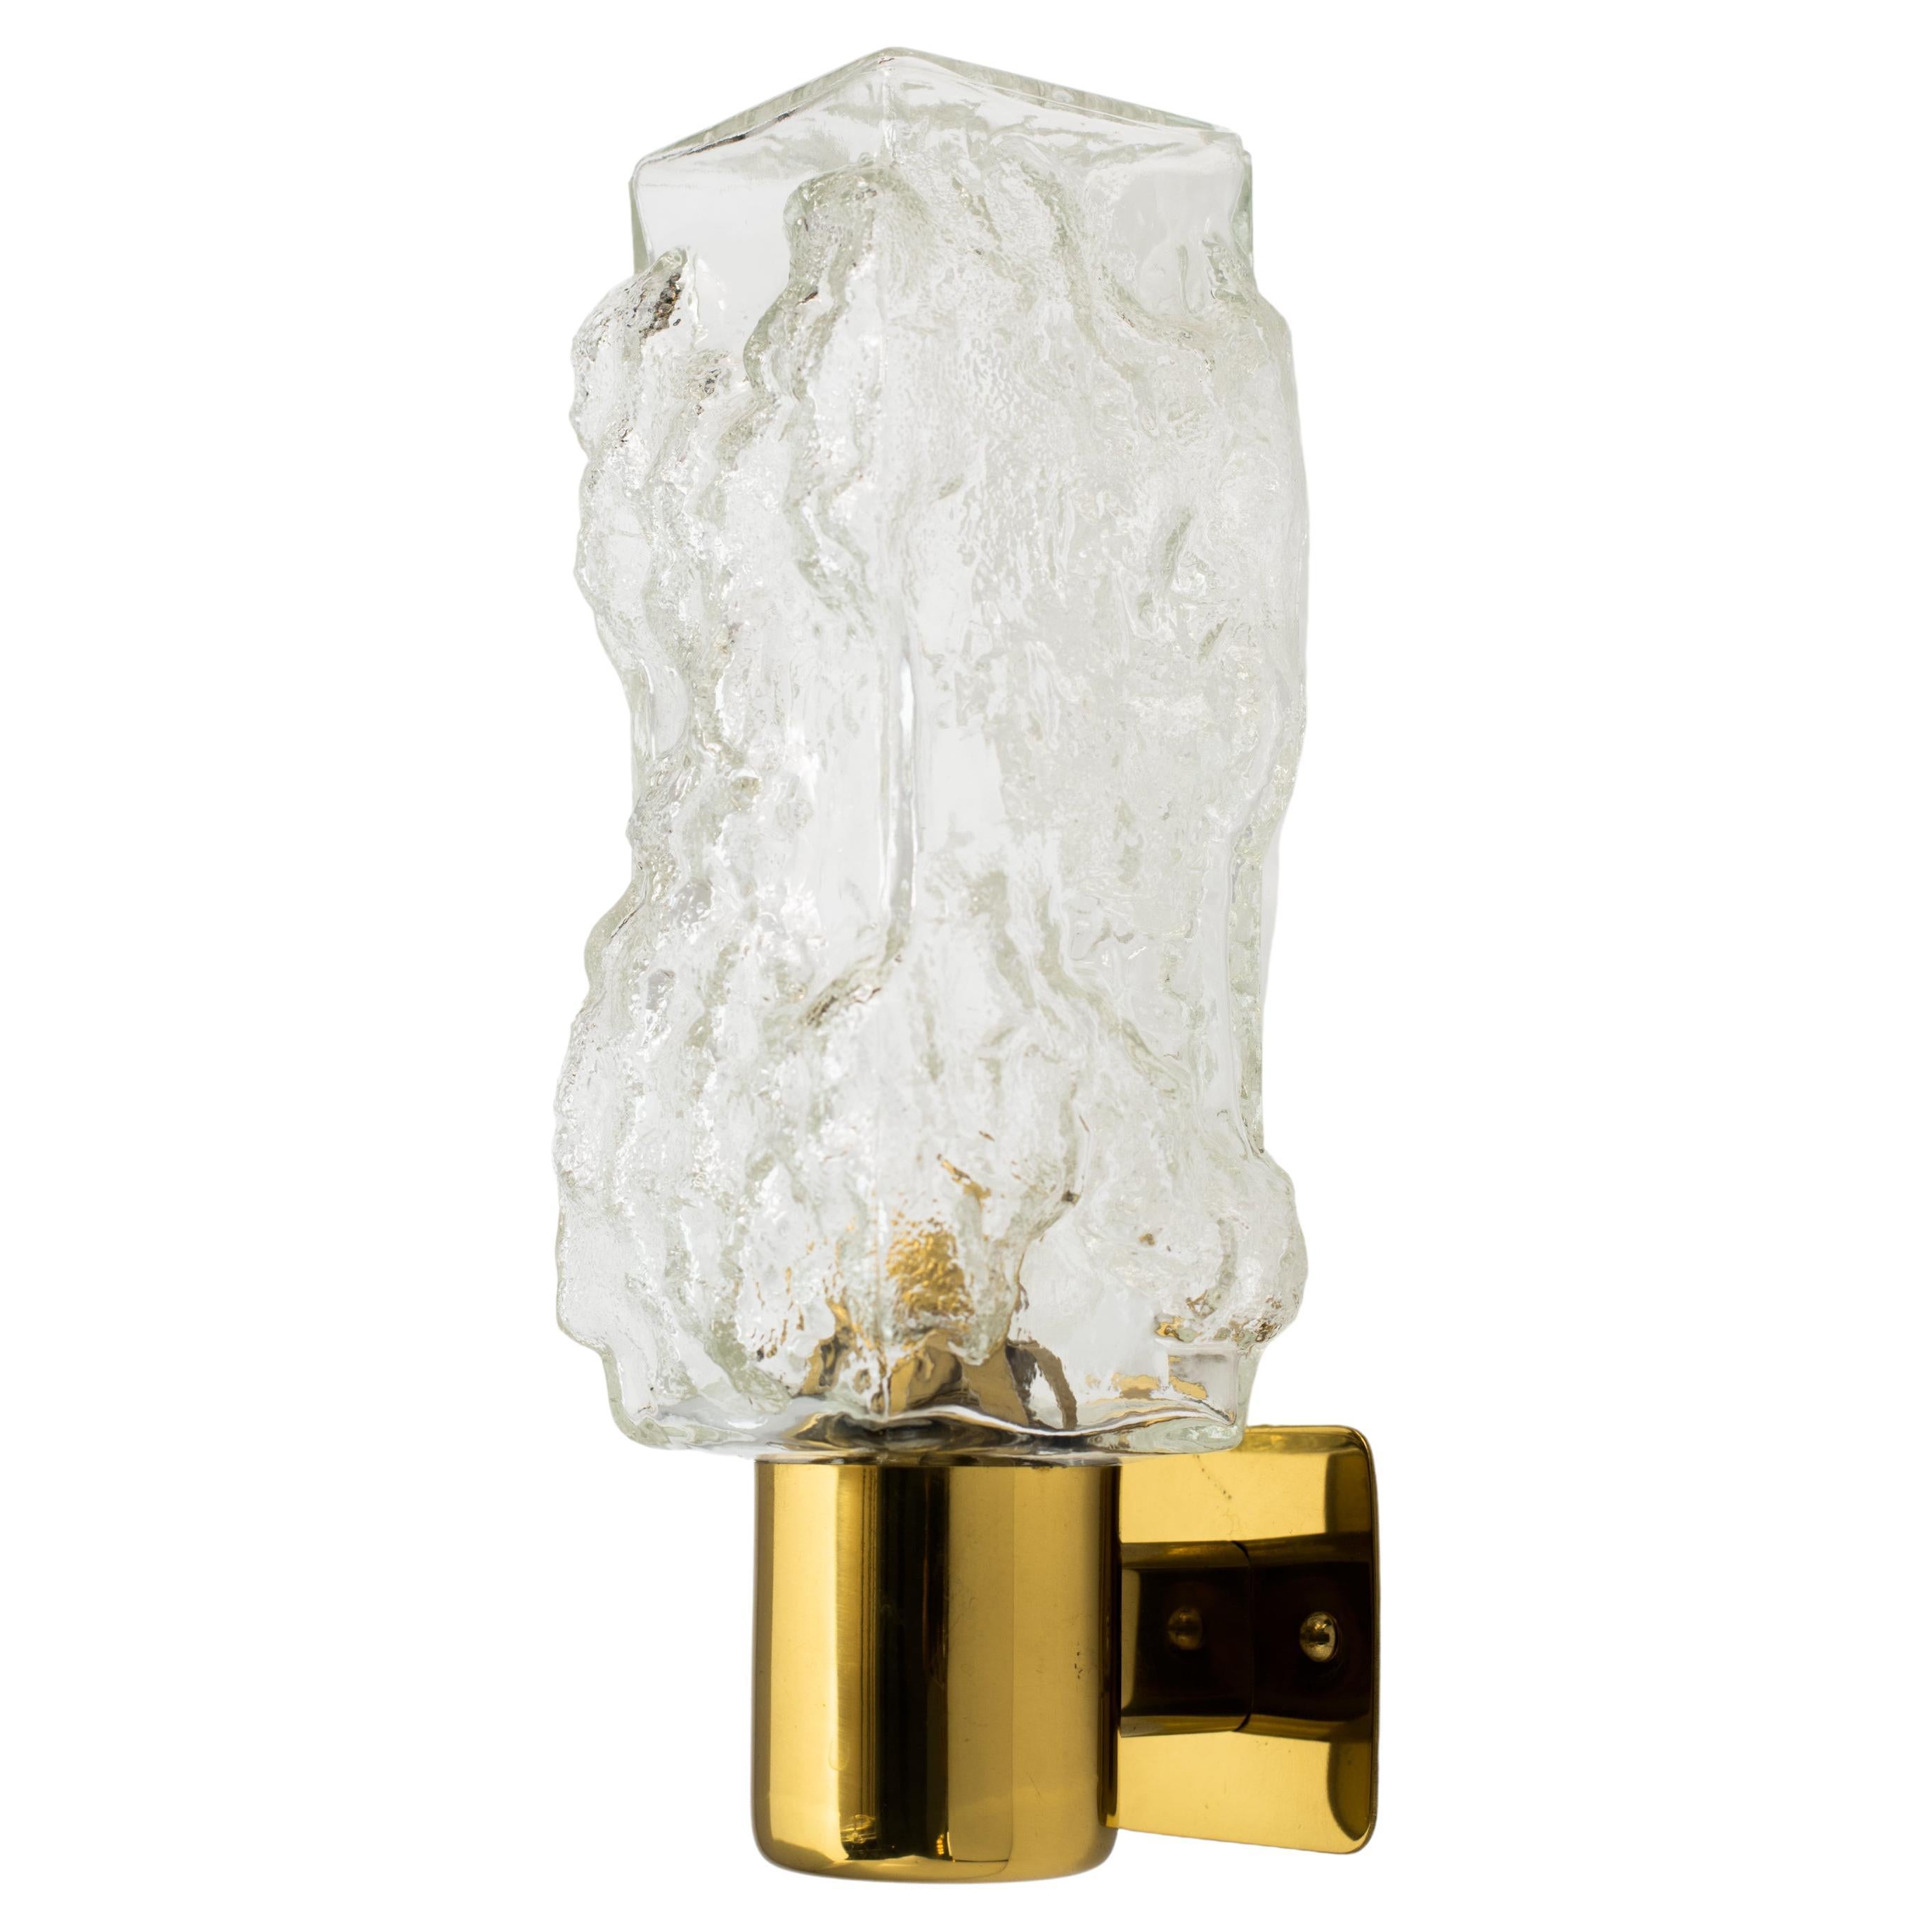 Kalmar Murano Glass and Brass Metal Sconce with Brutalist Design, c. 1960's